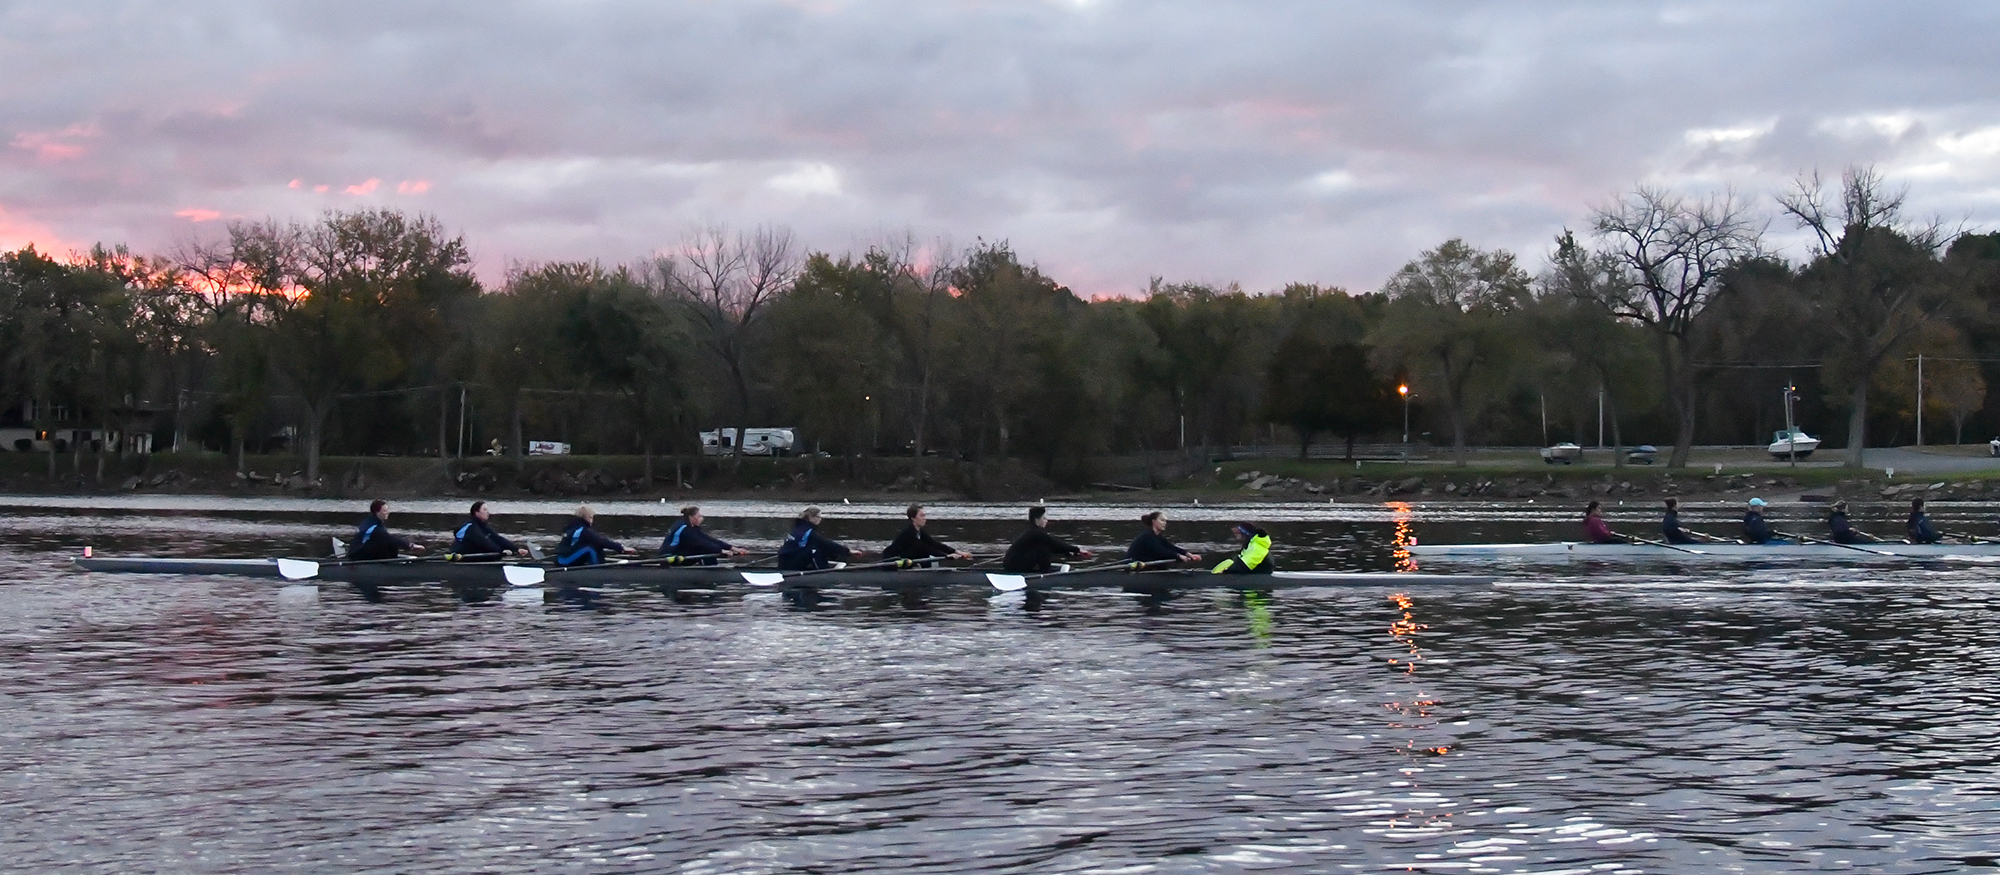 Action photo of the Lyons rowing team on the Connecticut River.